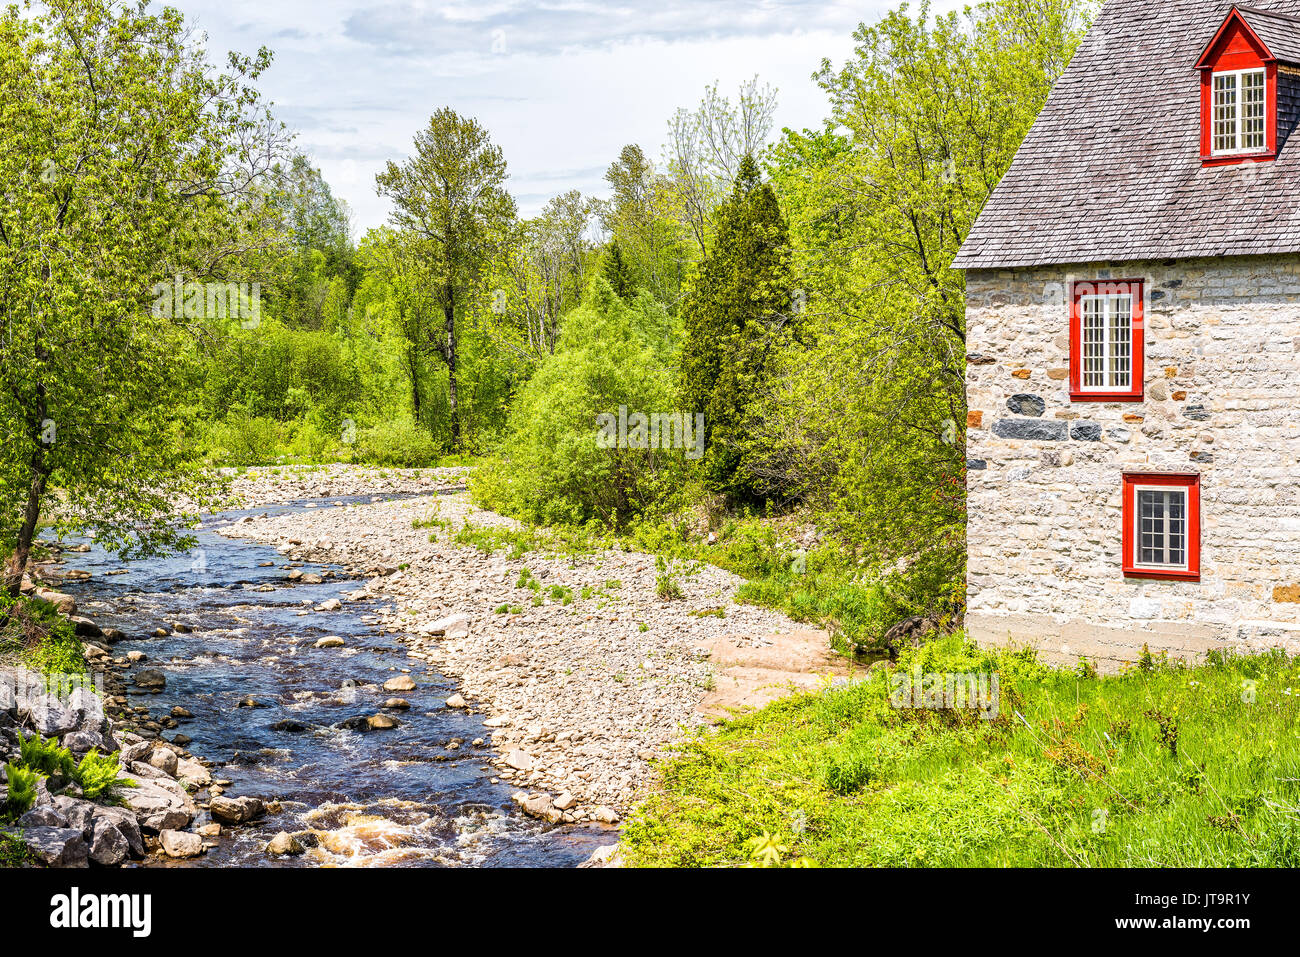 Stone Cottage Colorful House By River On Chemin Du Roy In Quebec